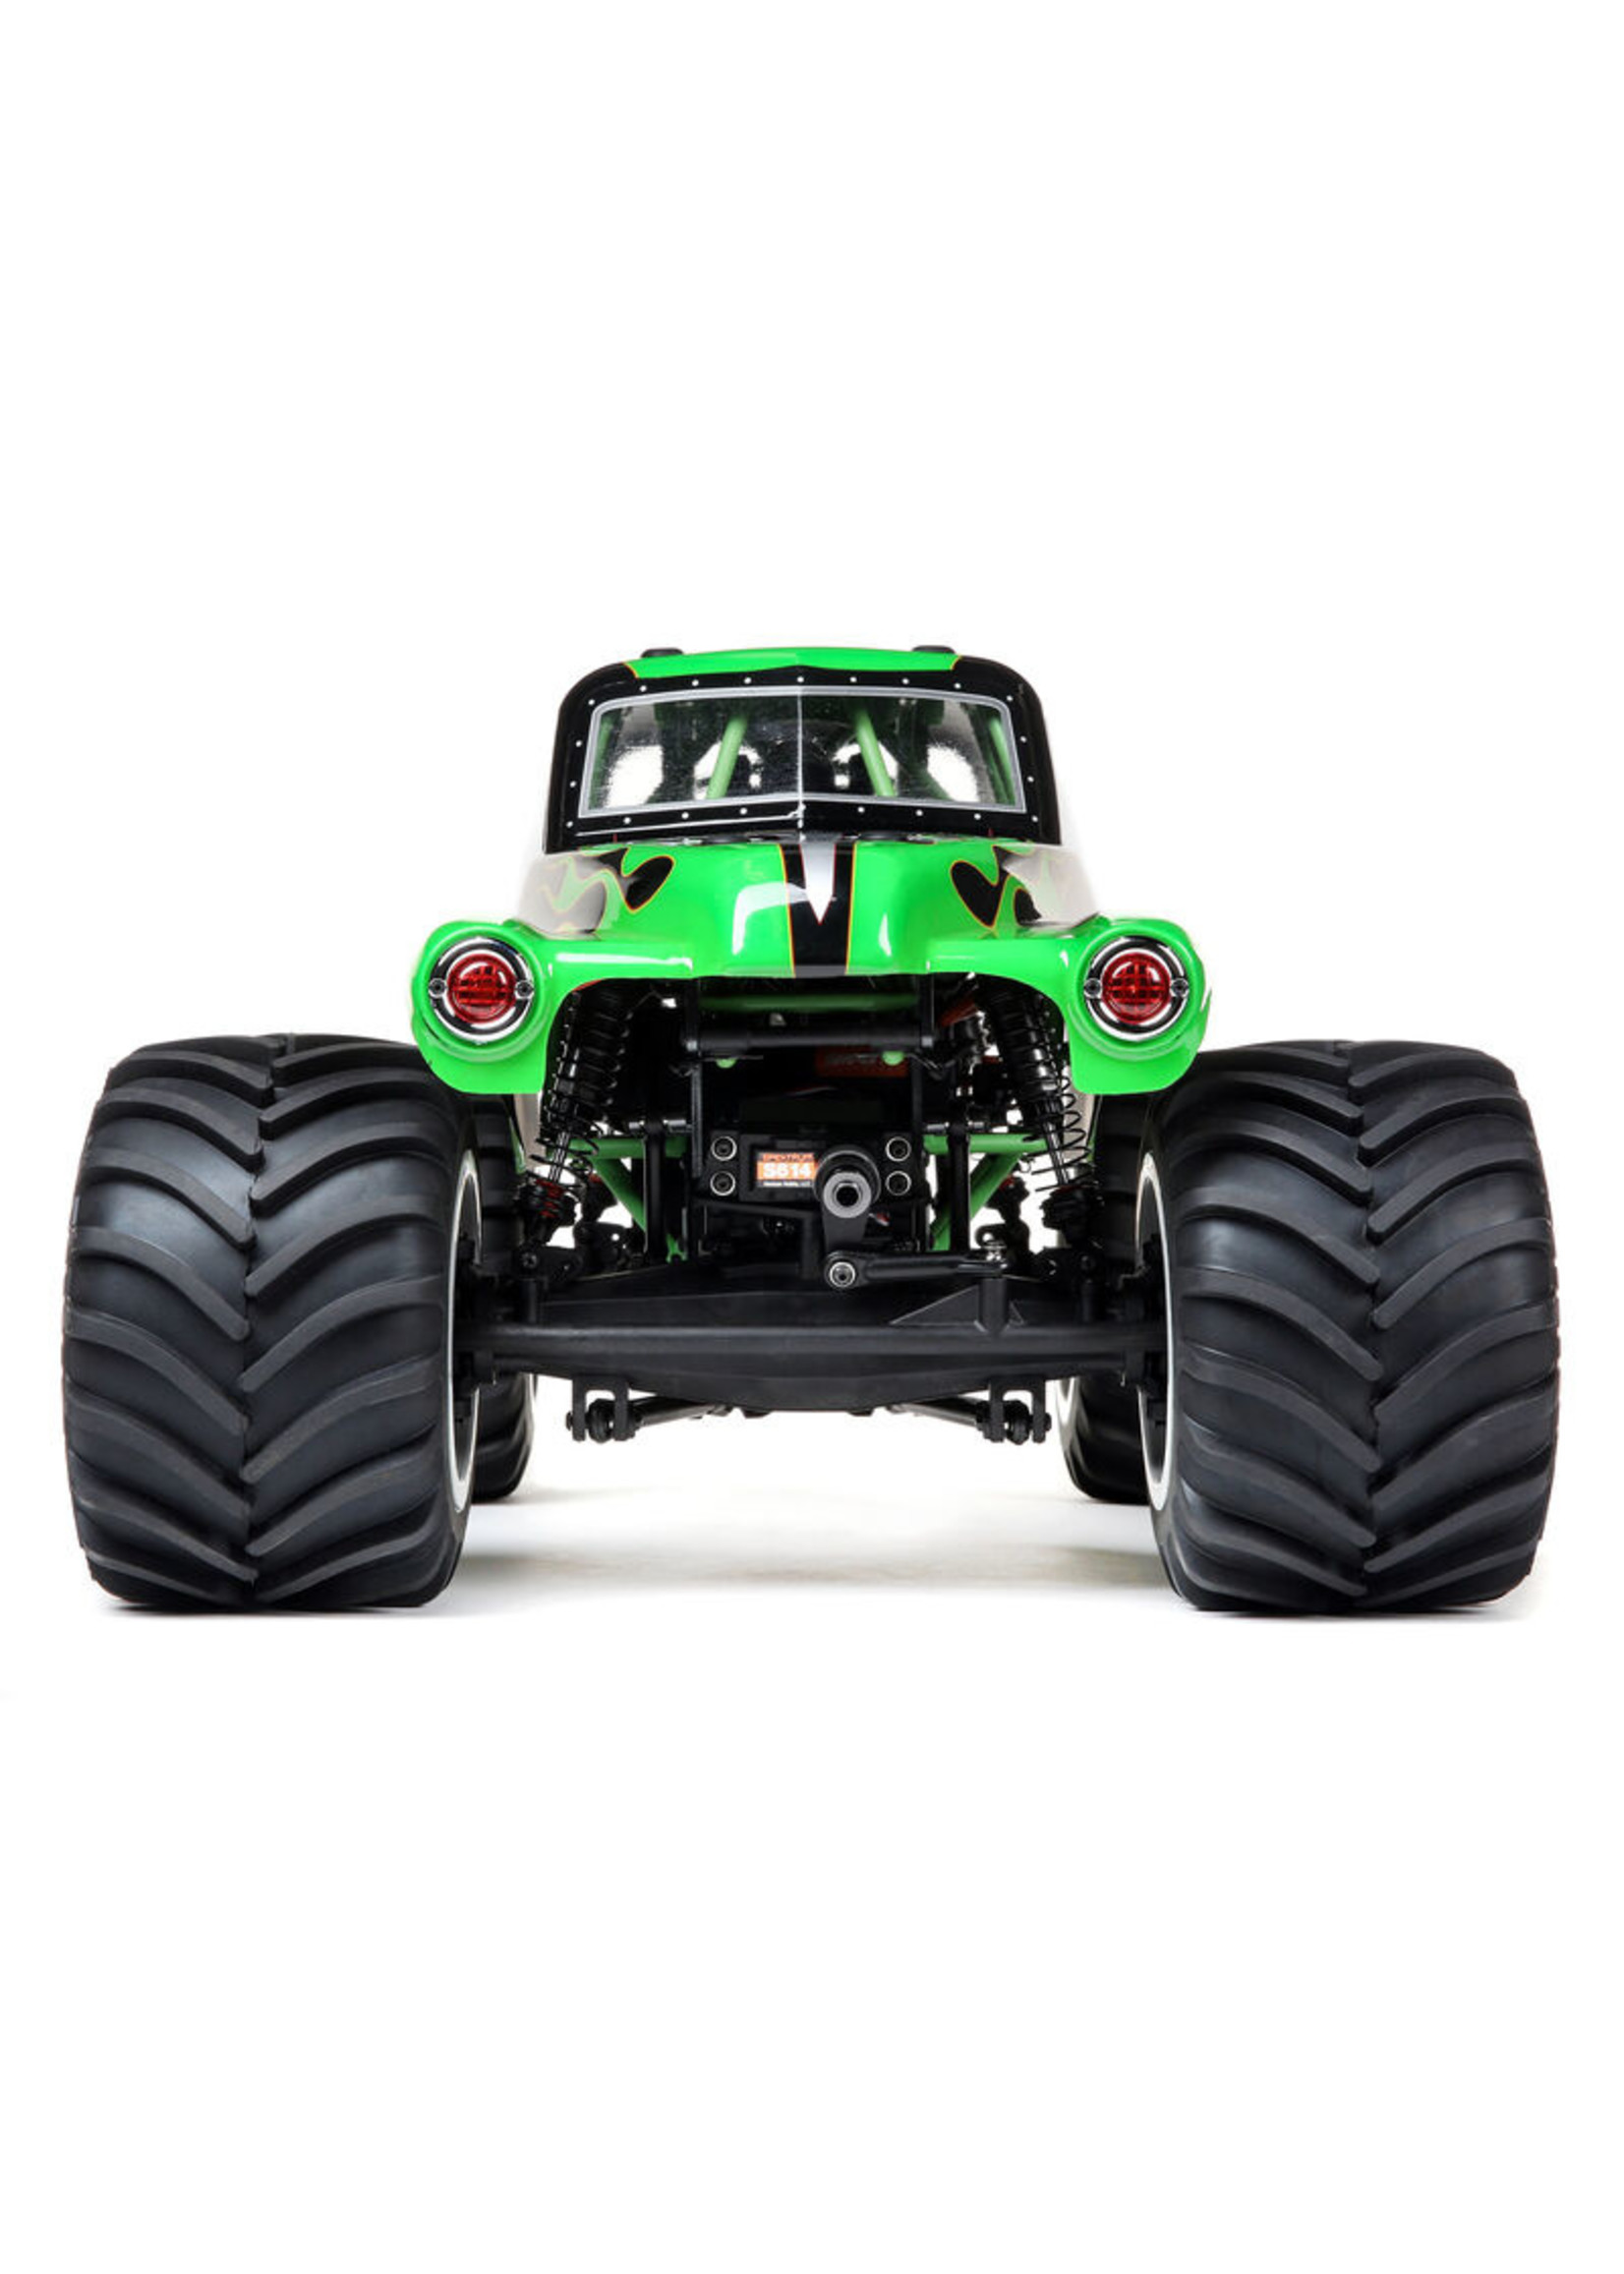 LMT 4X4 Solid Axle Monster Truck RTR, Grave DiggerGREEN